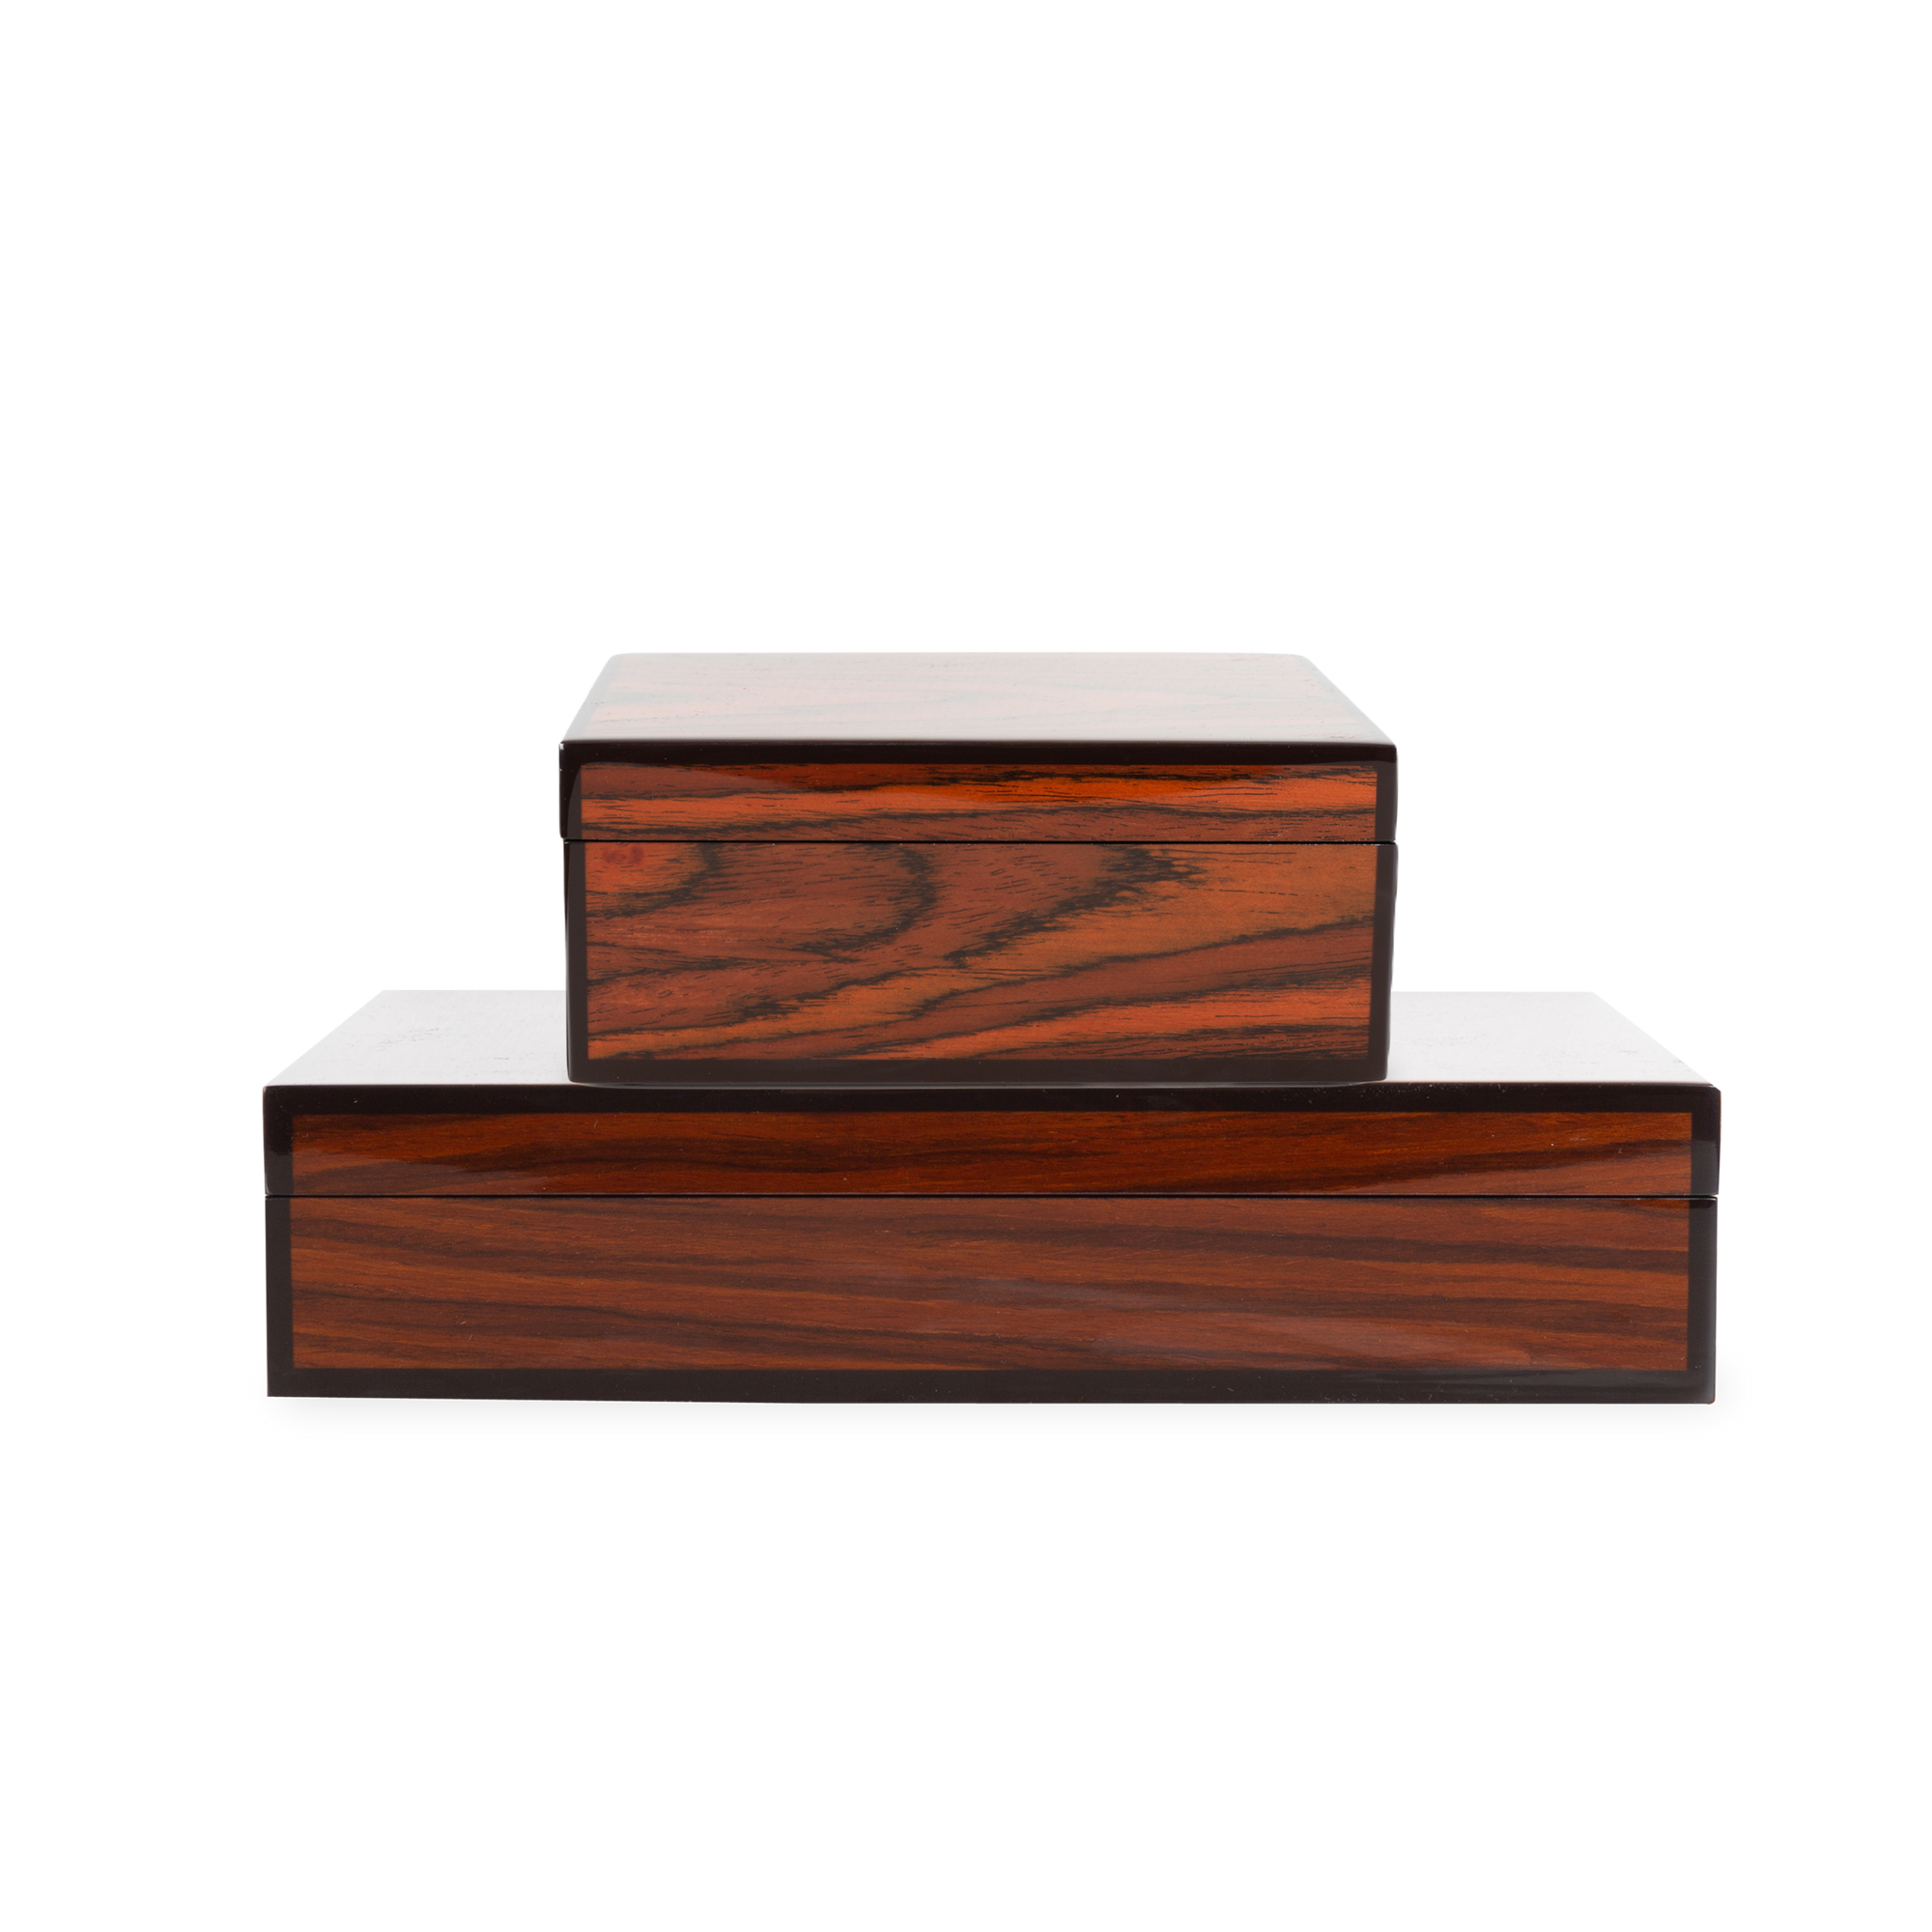 The Lacquered Rosewood Box uses hand-crafted lacquered wood that is produced by the traditional method of hand-pouring multiple layers of lacquer and hand-polishing each layer, res